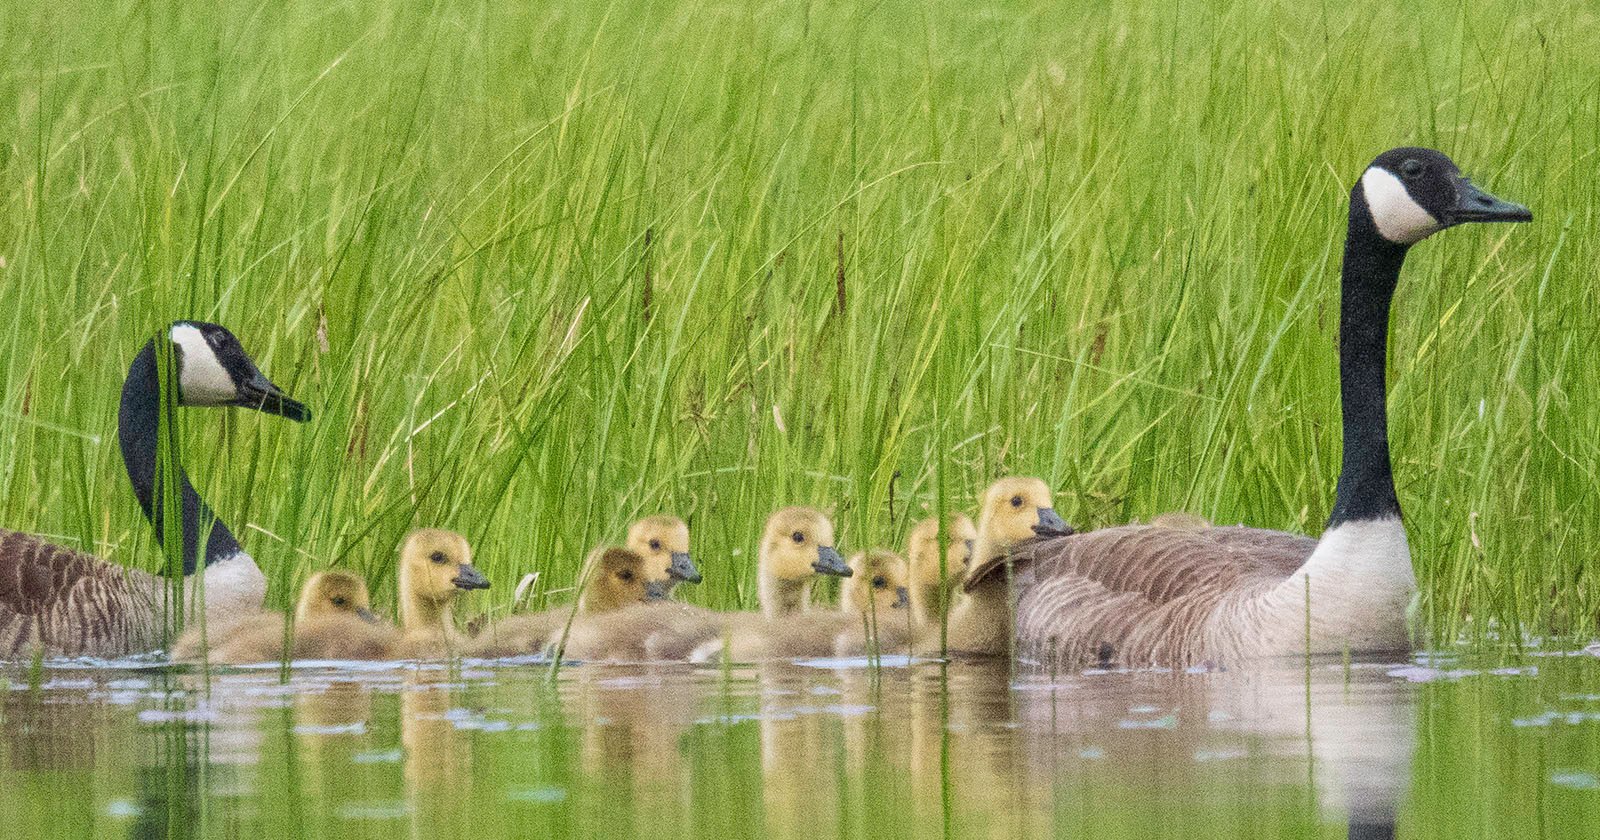 Two adult geese swim in a line with nine fluffy goslings through calm water surrounded by tall, green grass. The family appears to be moving together in a natural wetland environment.